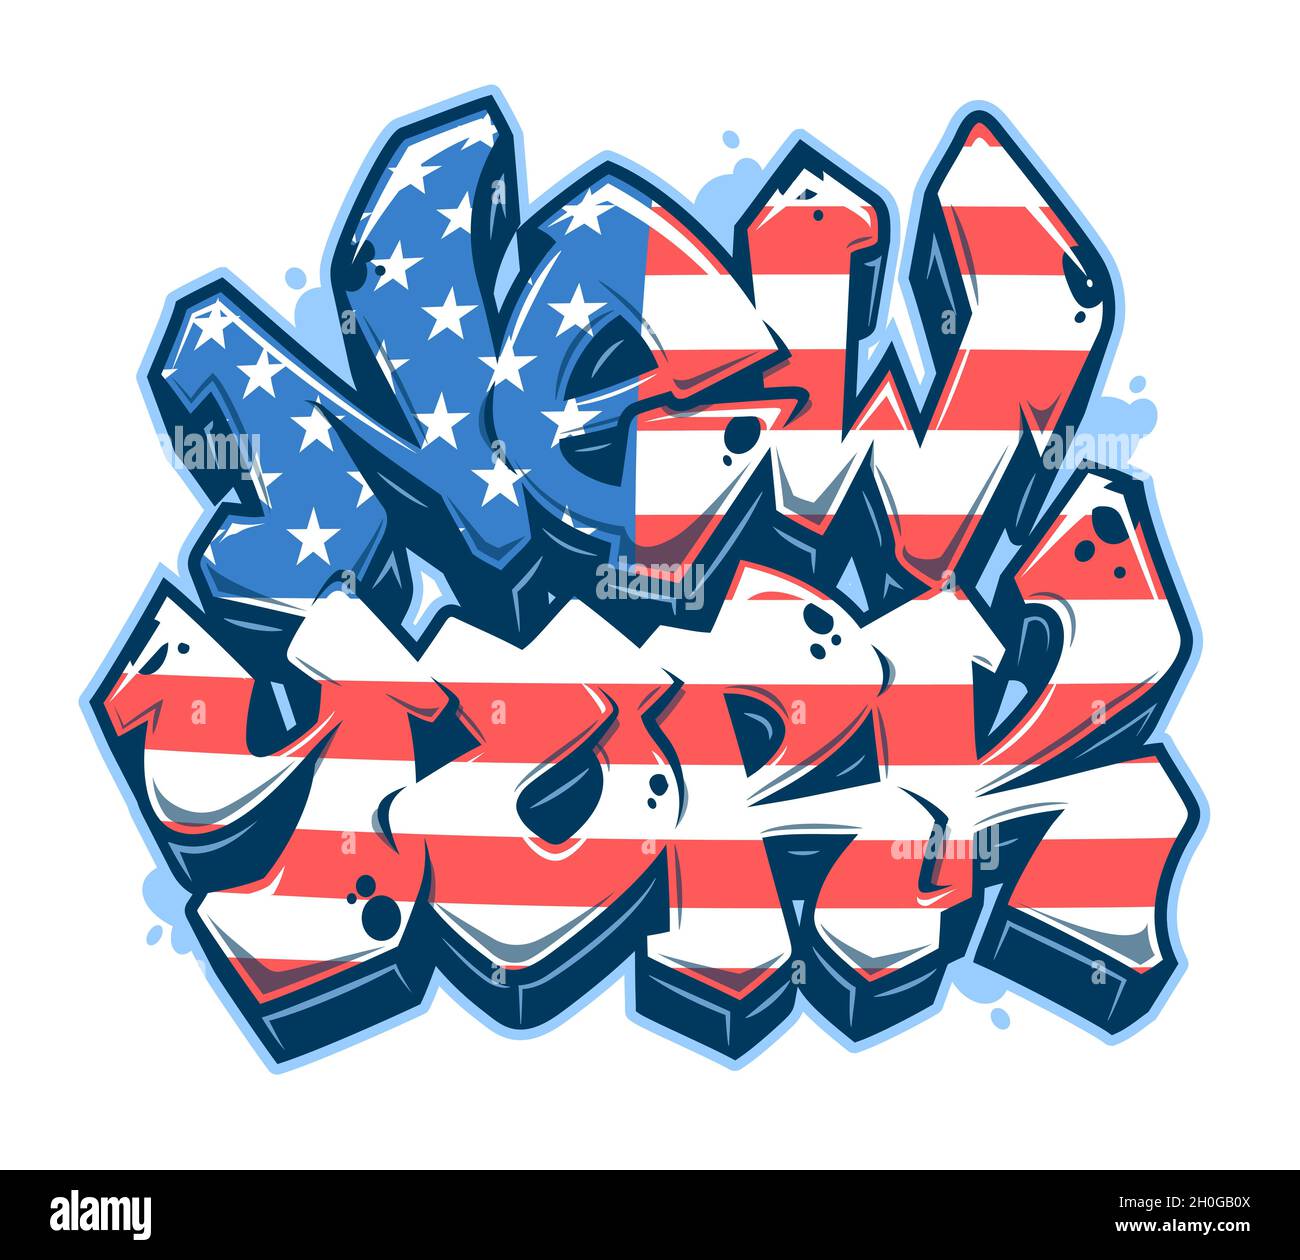 New York lettering in readable graffiti style with United States of America flag. Isolated on white background. Stock Vector